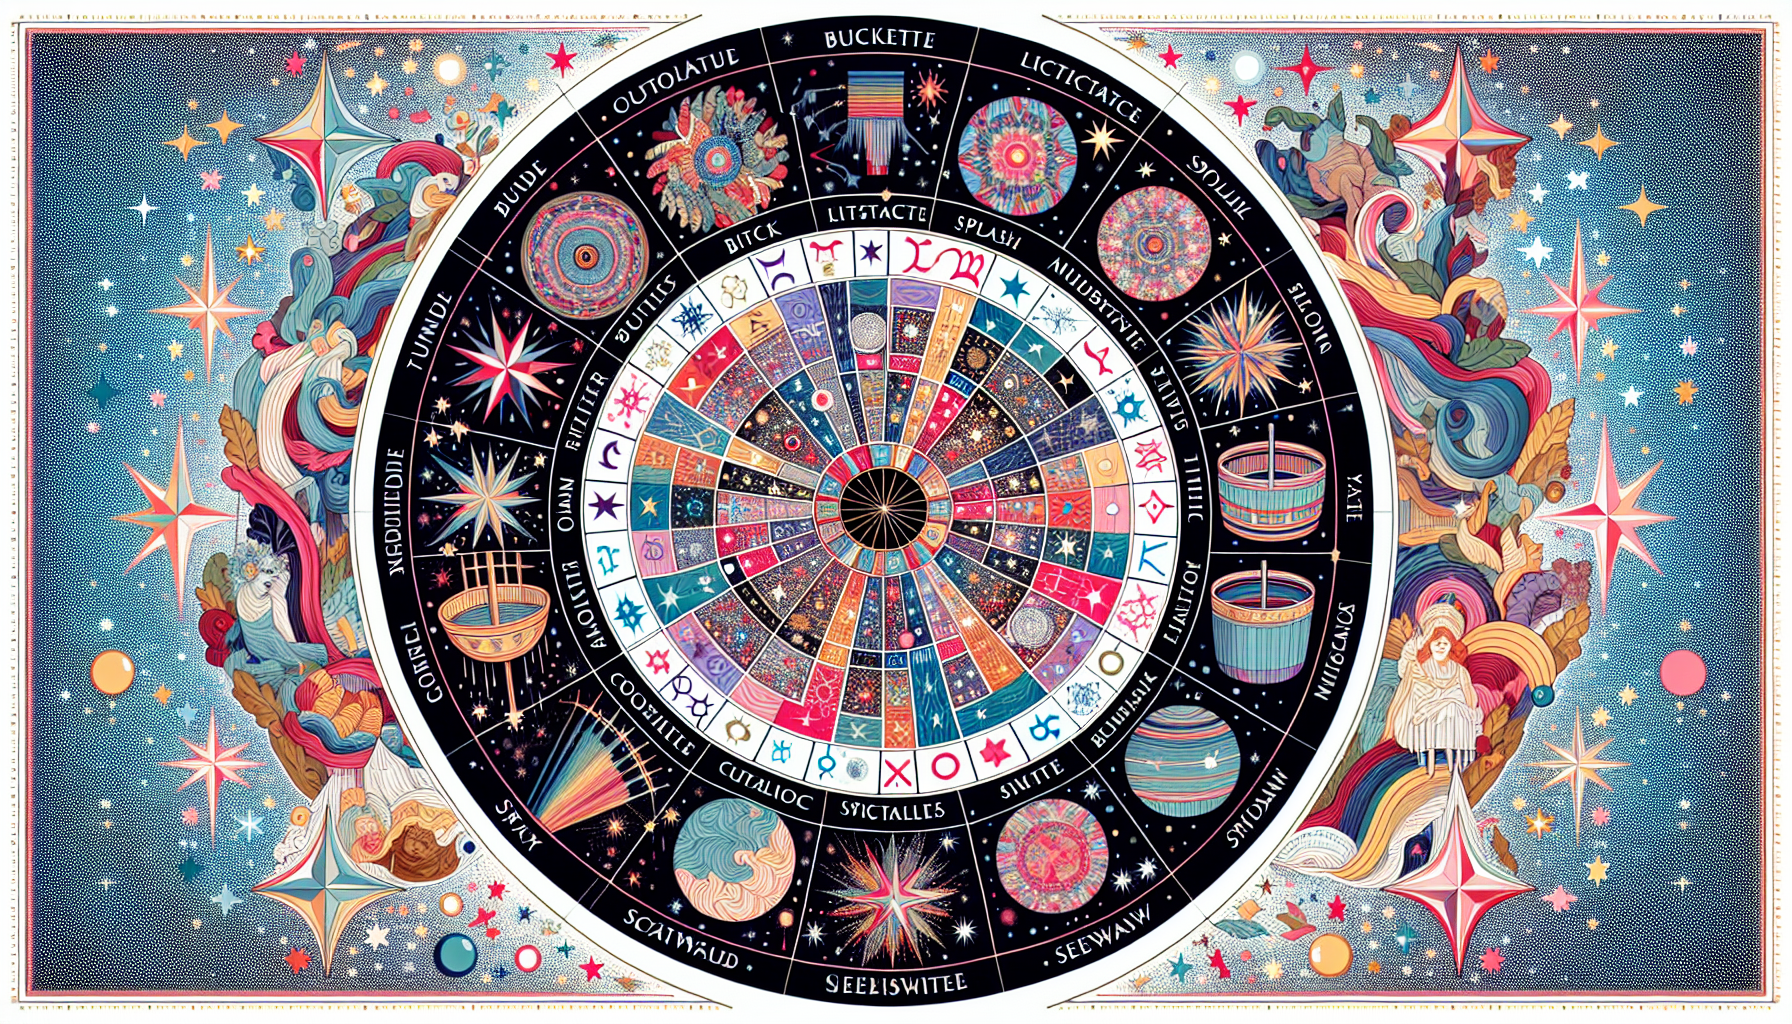 Illustration of astrological pattern configurations in a birth chart